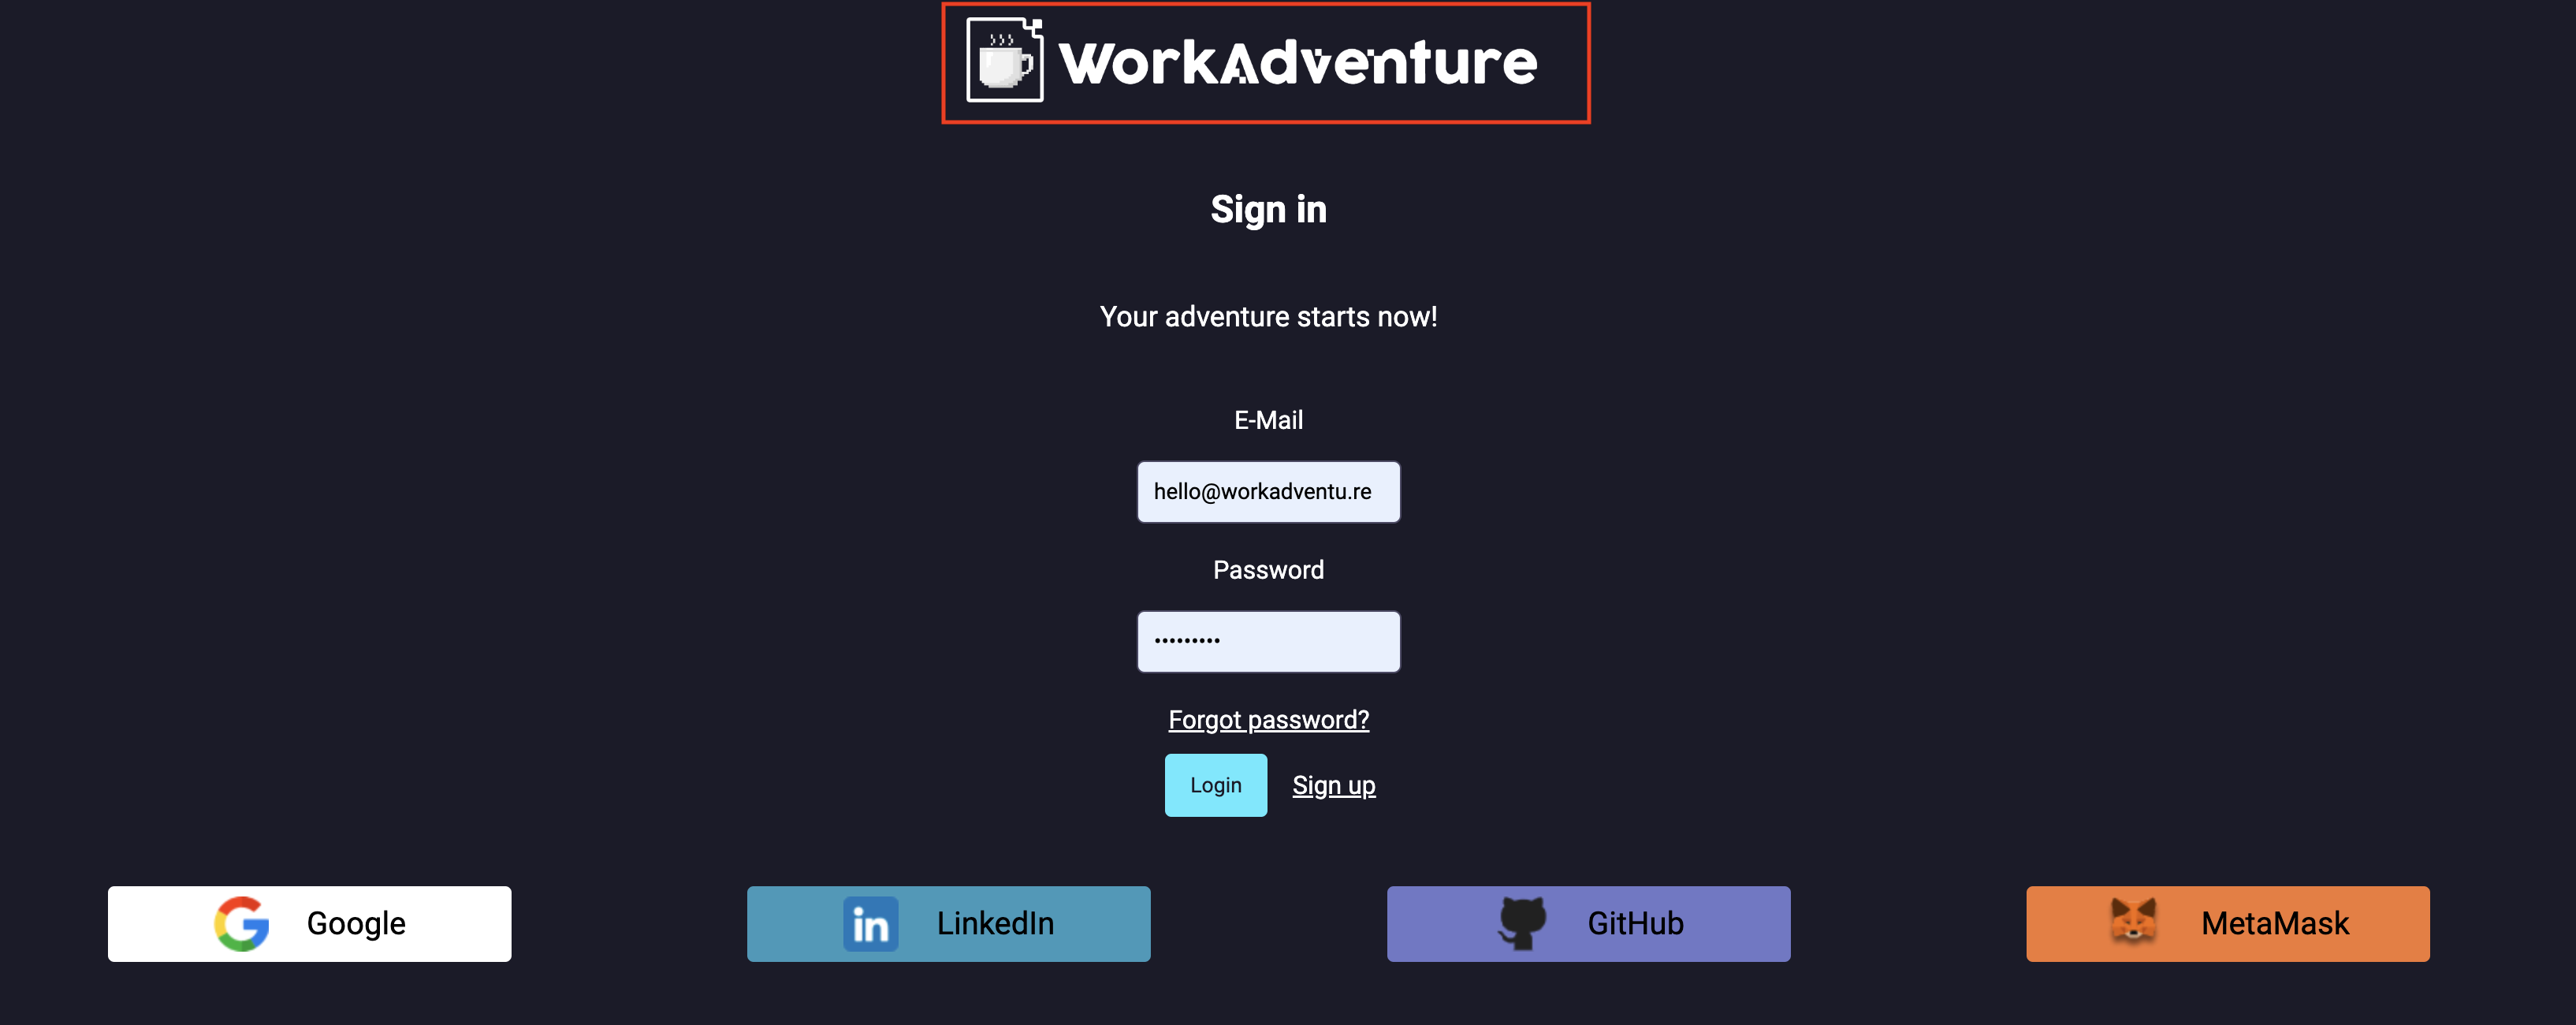 WorkAdventure logo setting in the authentication login for white label.